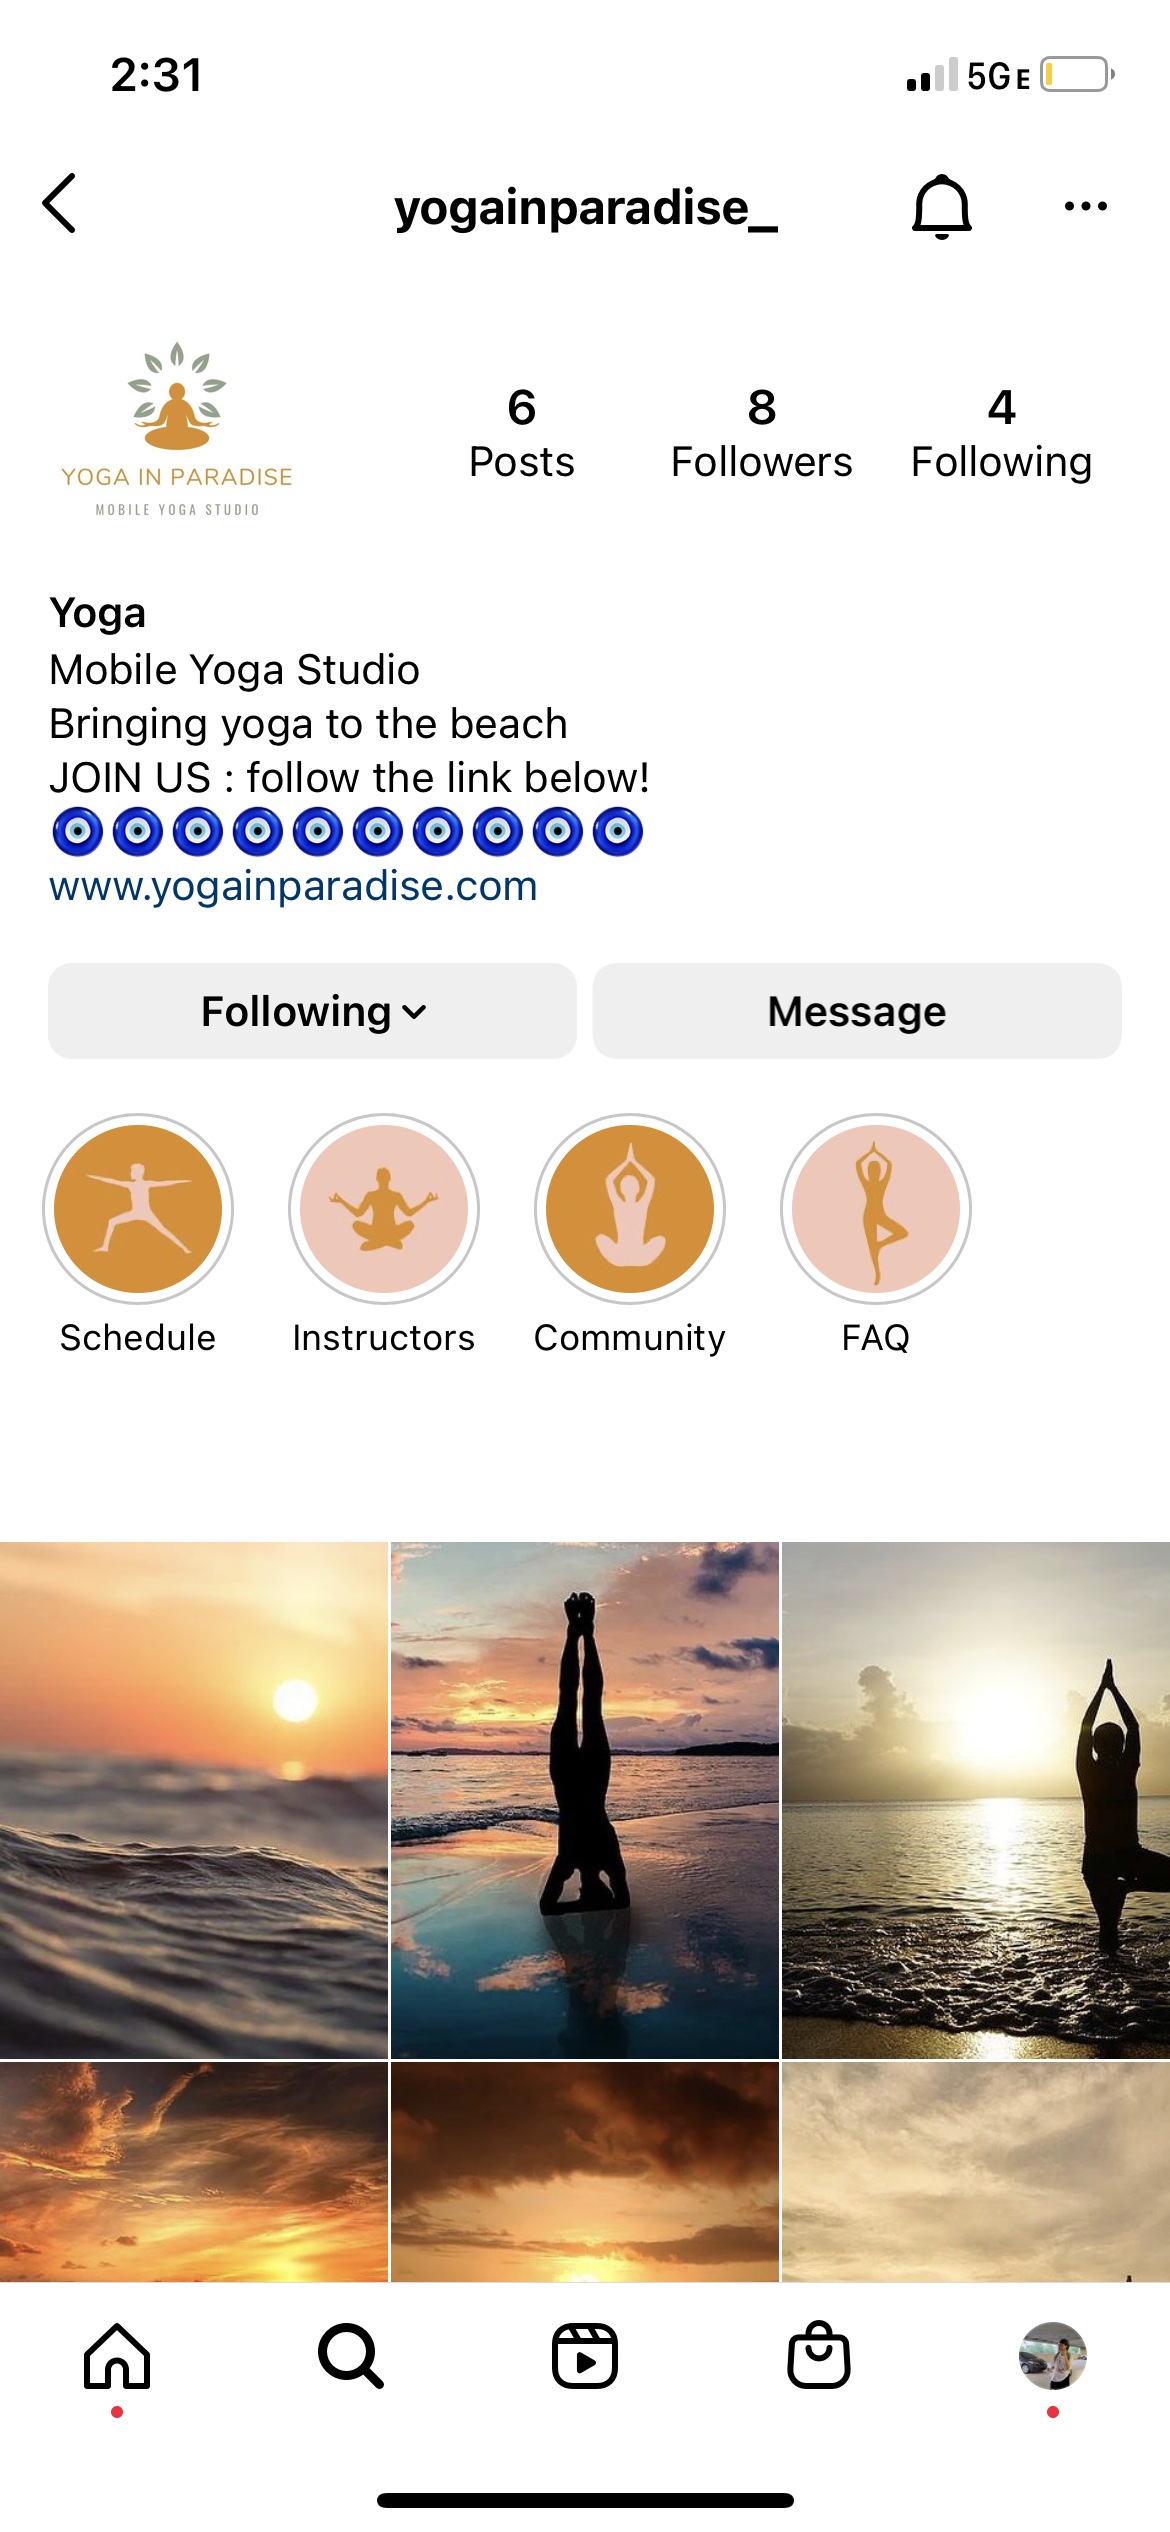 content creation and social media services created for yoga in paradise